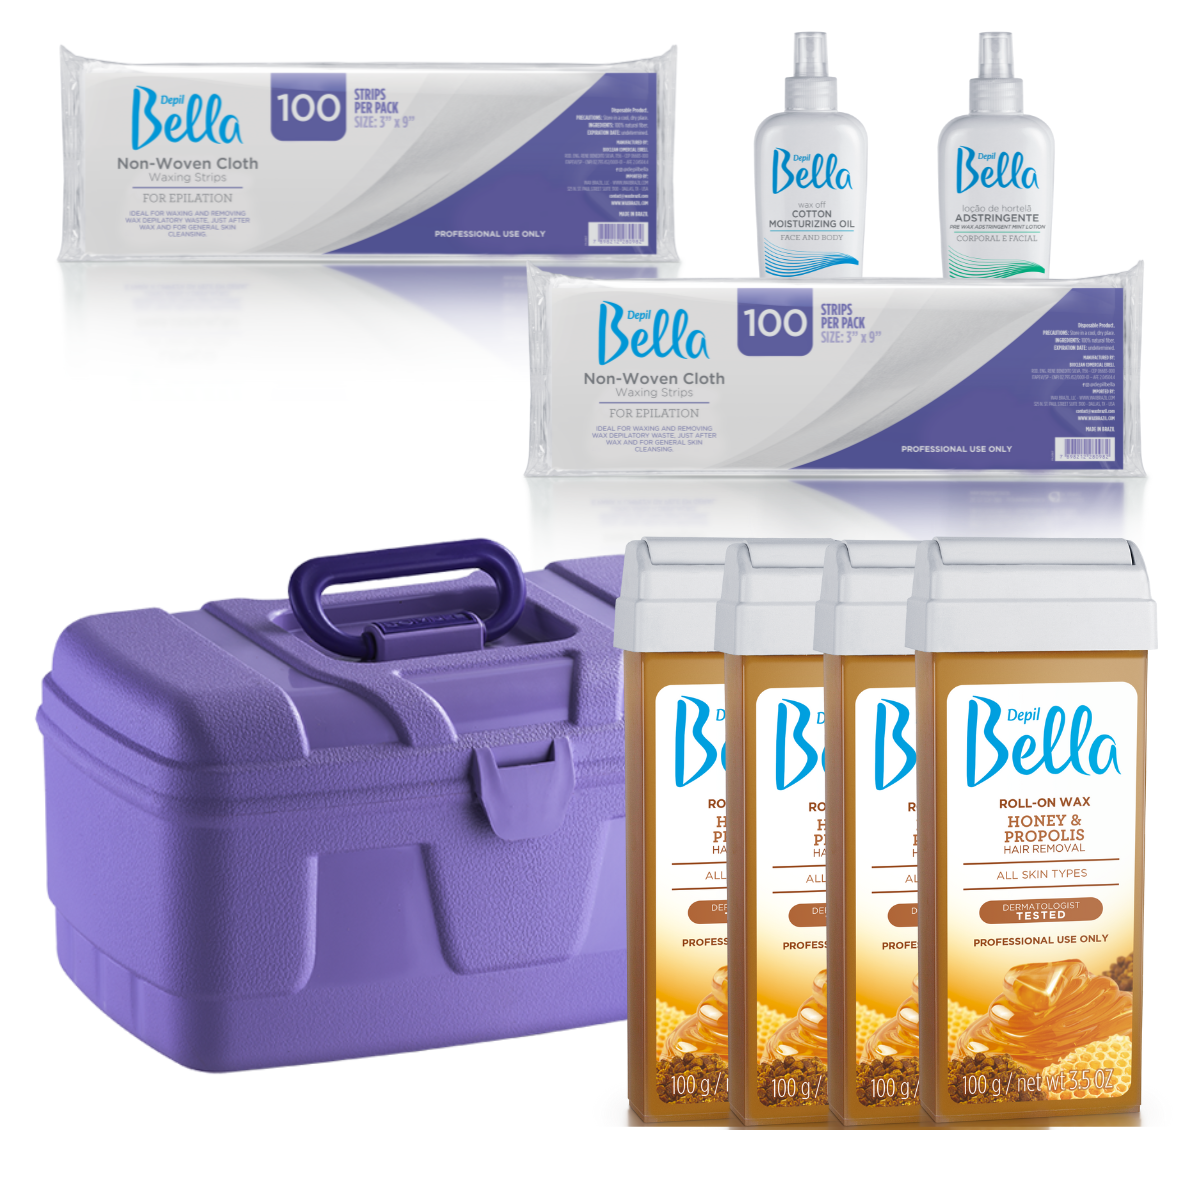 Depil Bella Bundle - 200 Non-Woven Cloths, 4 Roll-On Honey Wax, Pre-Wax Astringent Lotion, Wax-Off Moisturizing Oil, and Purple Plastic Case - Buy professional cosmetics dedicated to hair removal